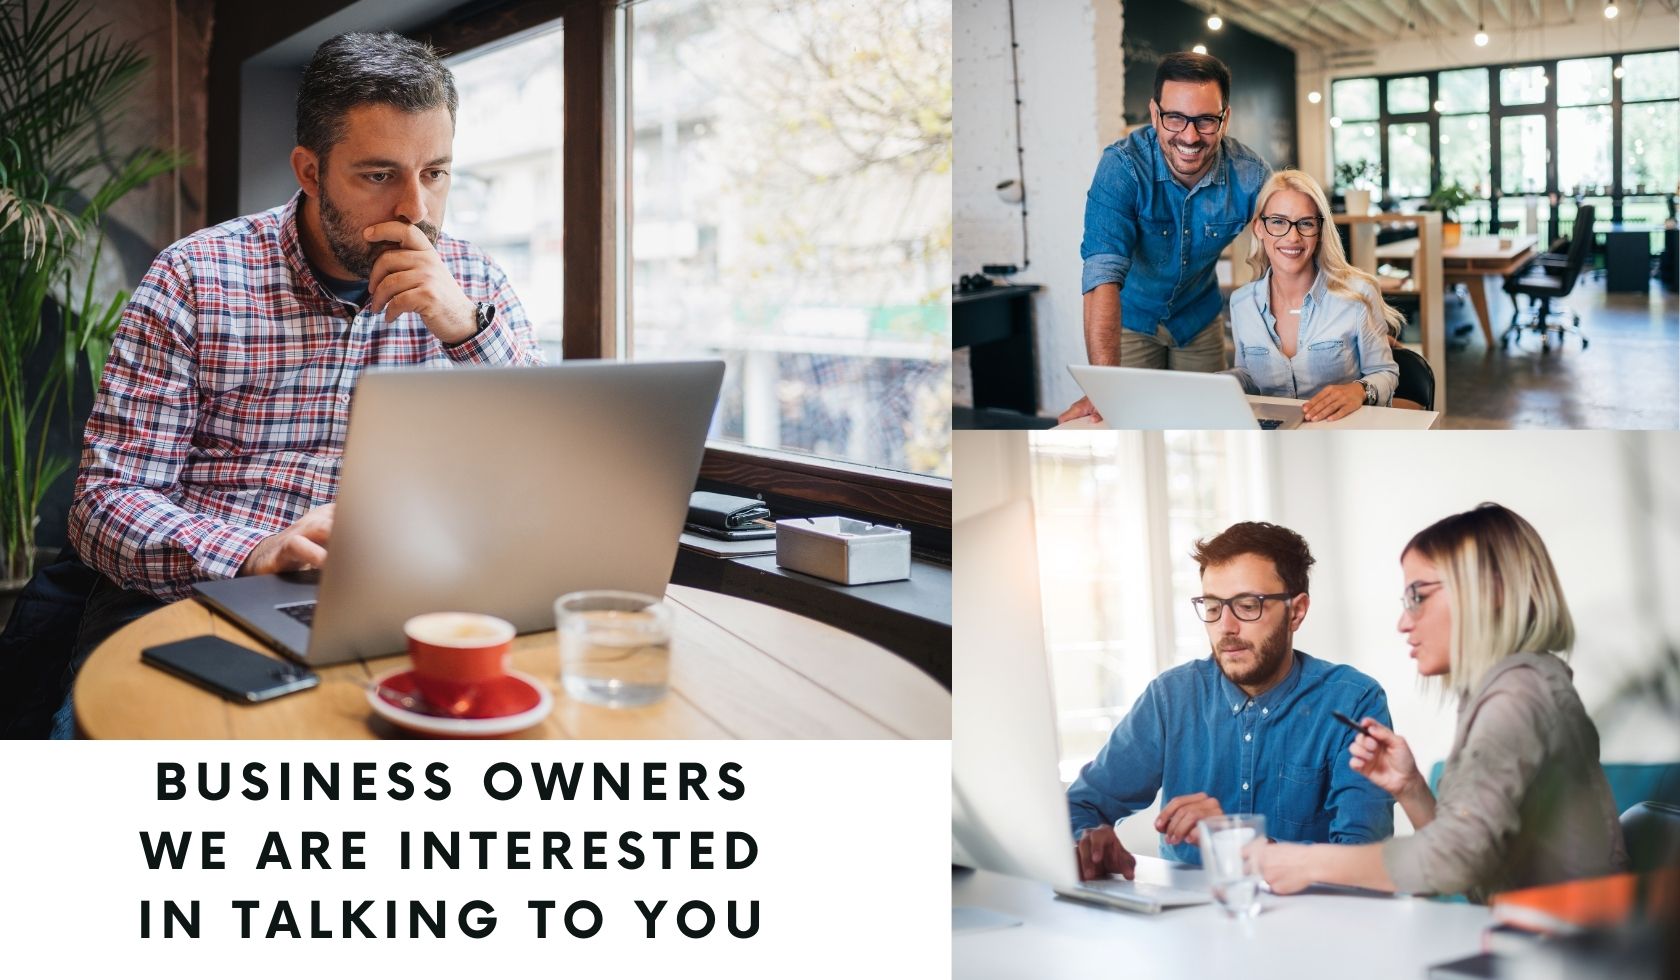 Photos of business owners